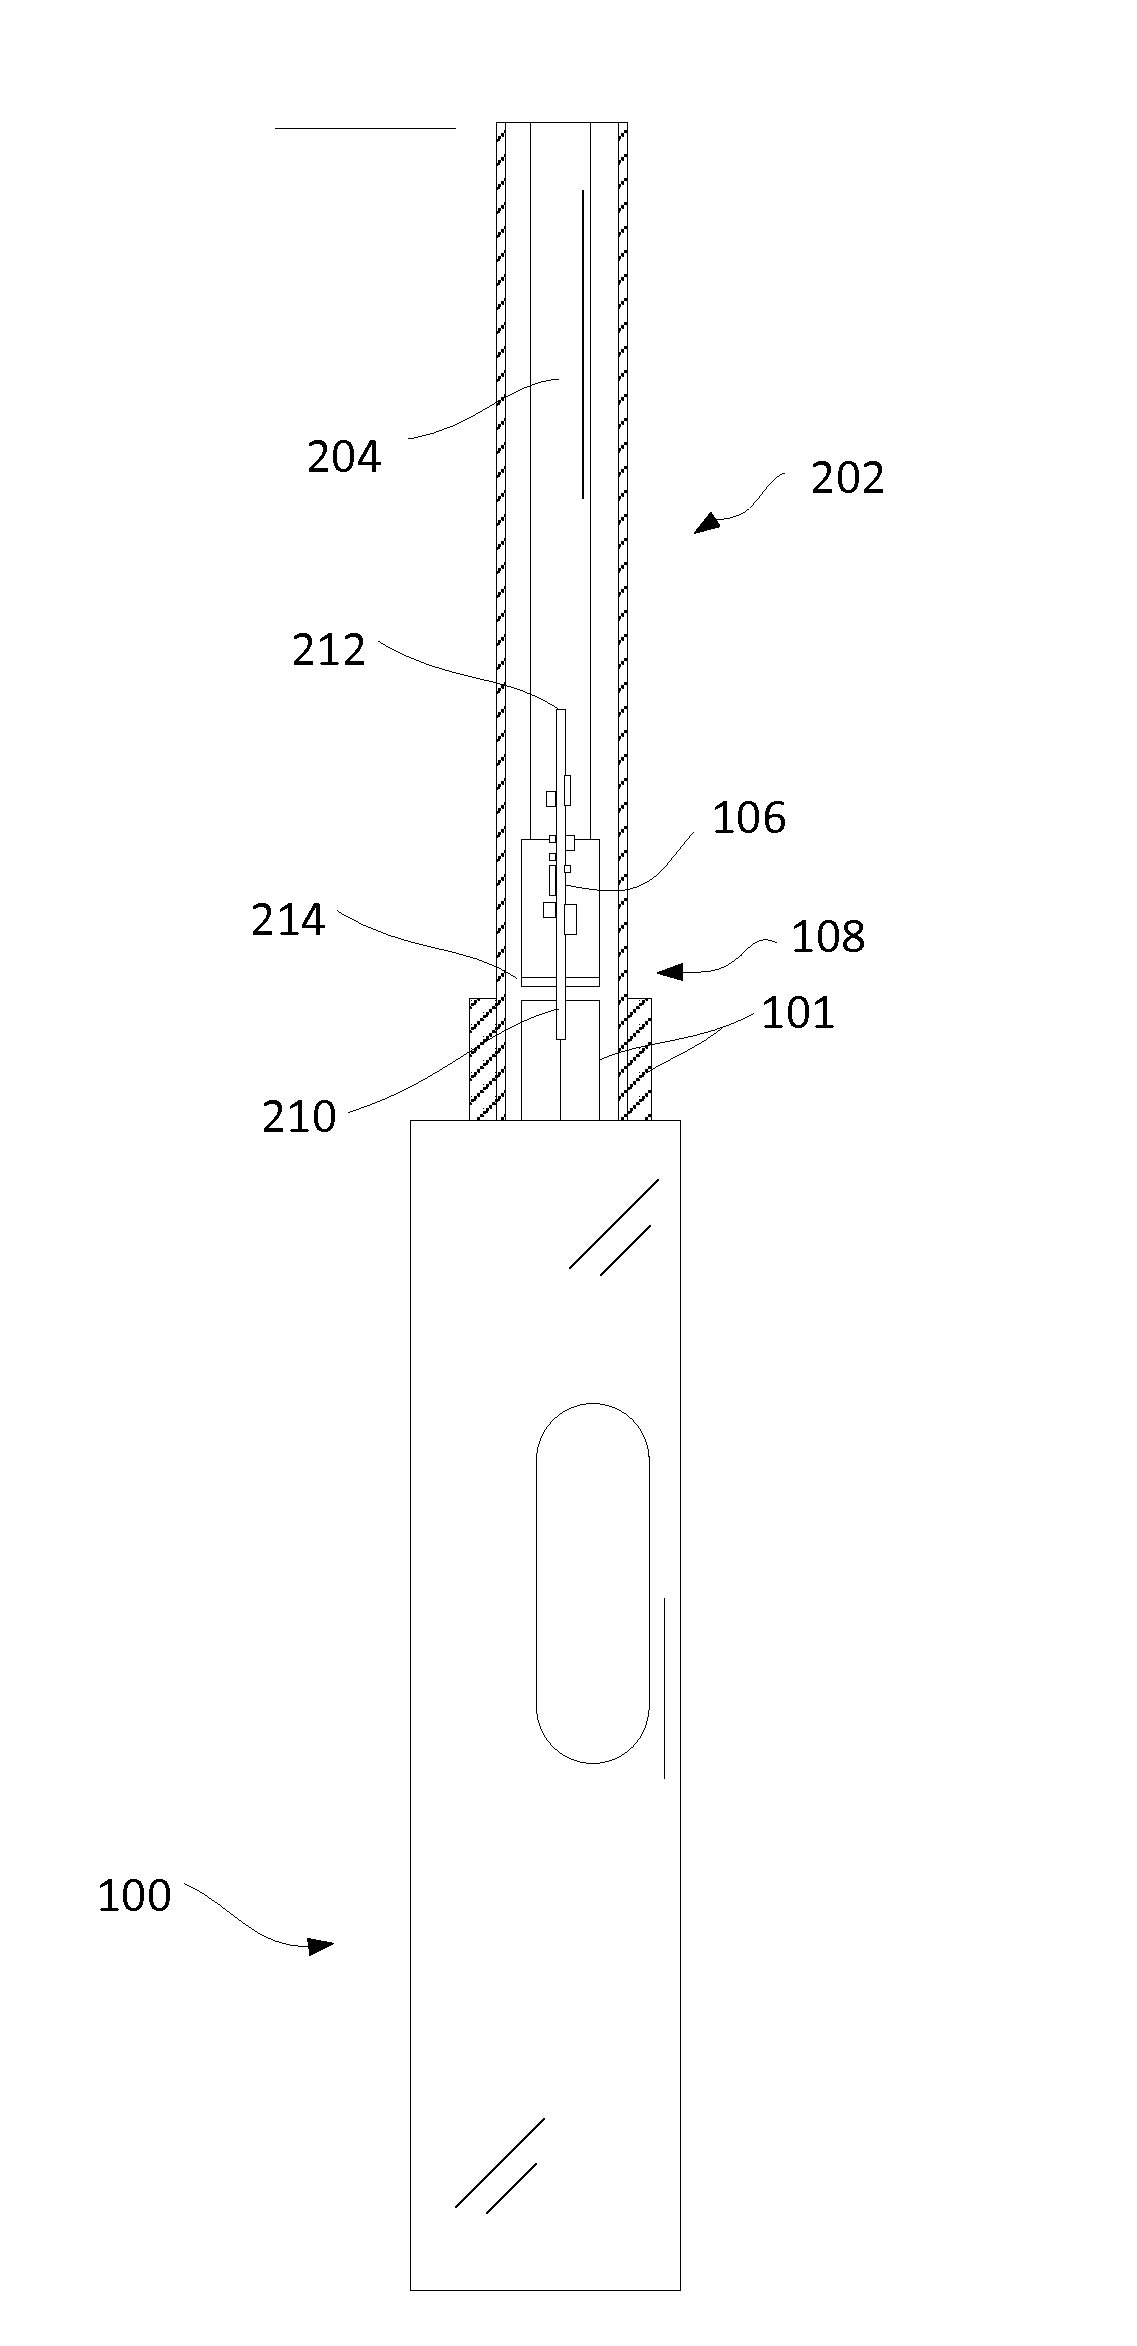 Orthogonal feed technique to recover spatial volume used for antenna matching